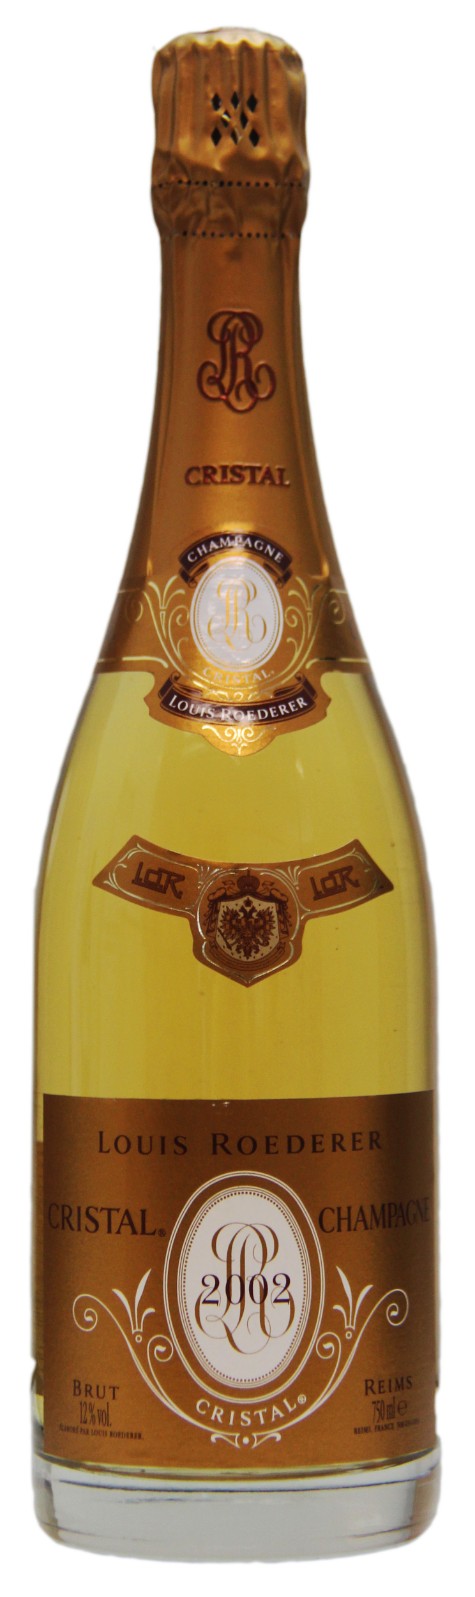 10 Things You Should Know about Cristal Champagne (2021)